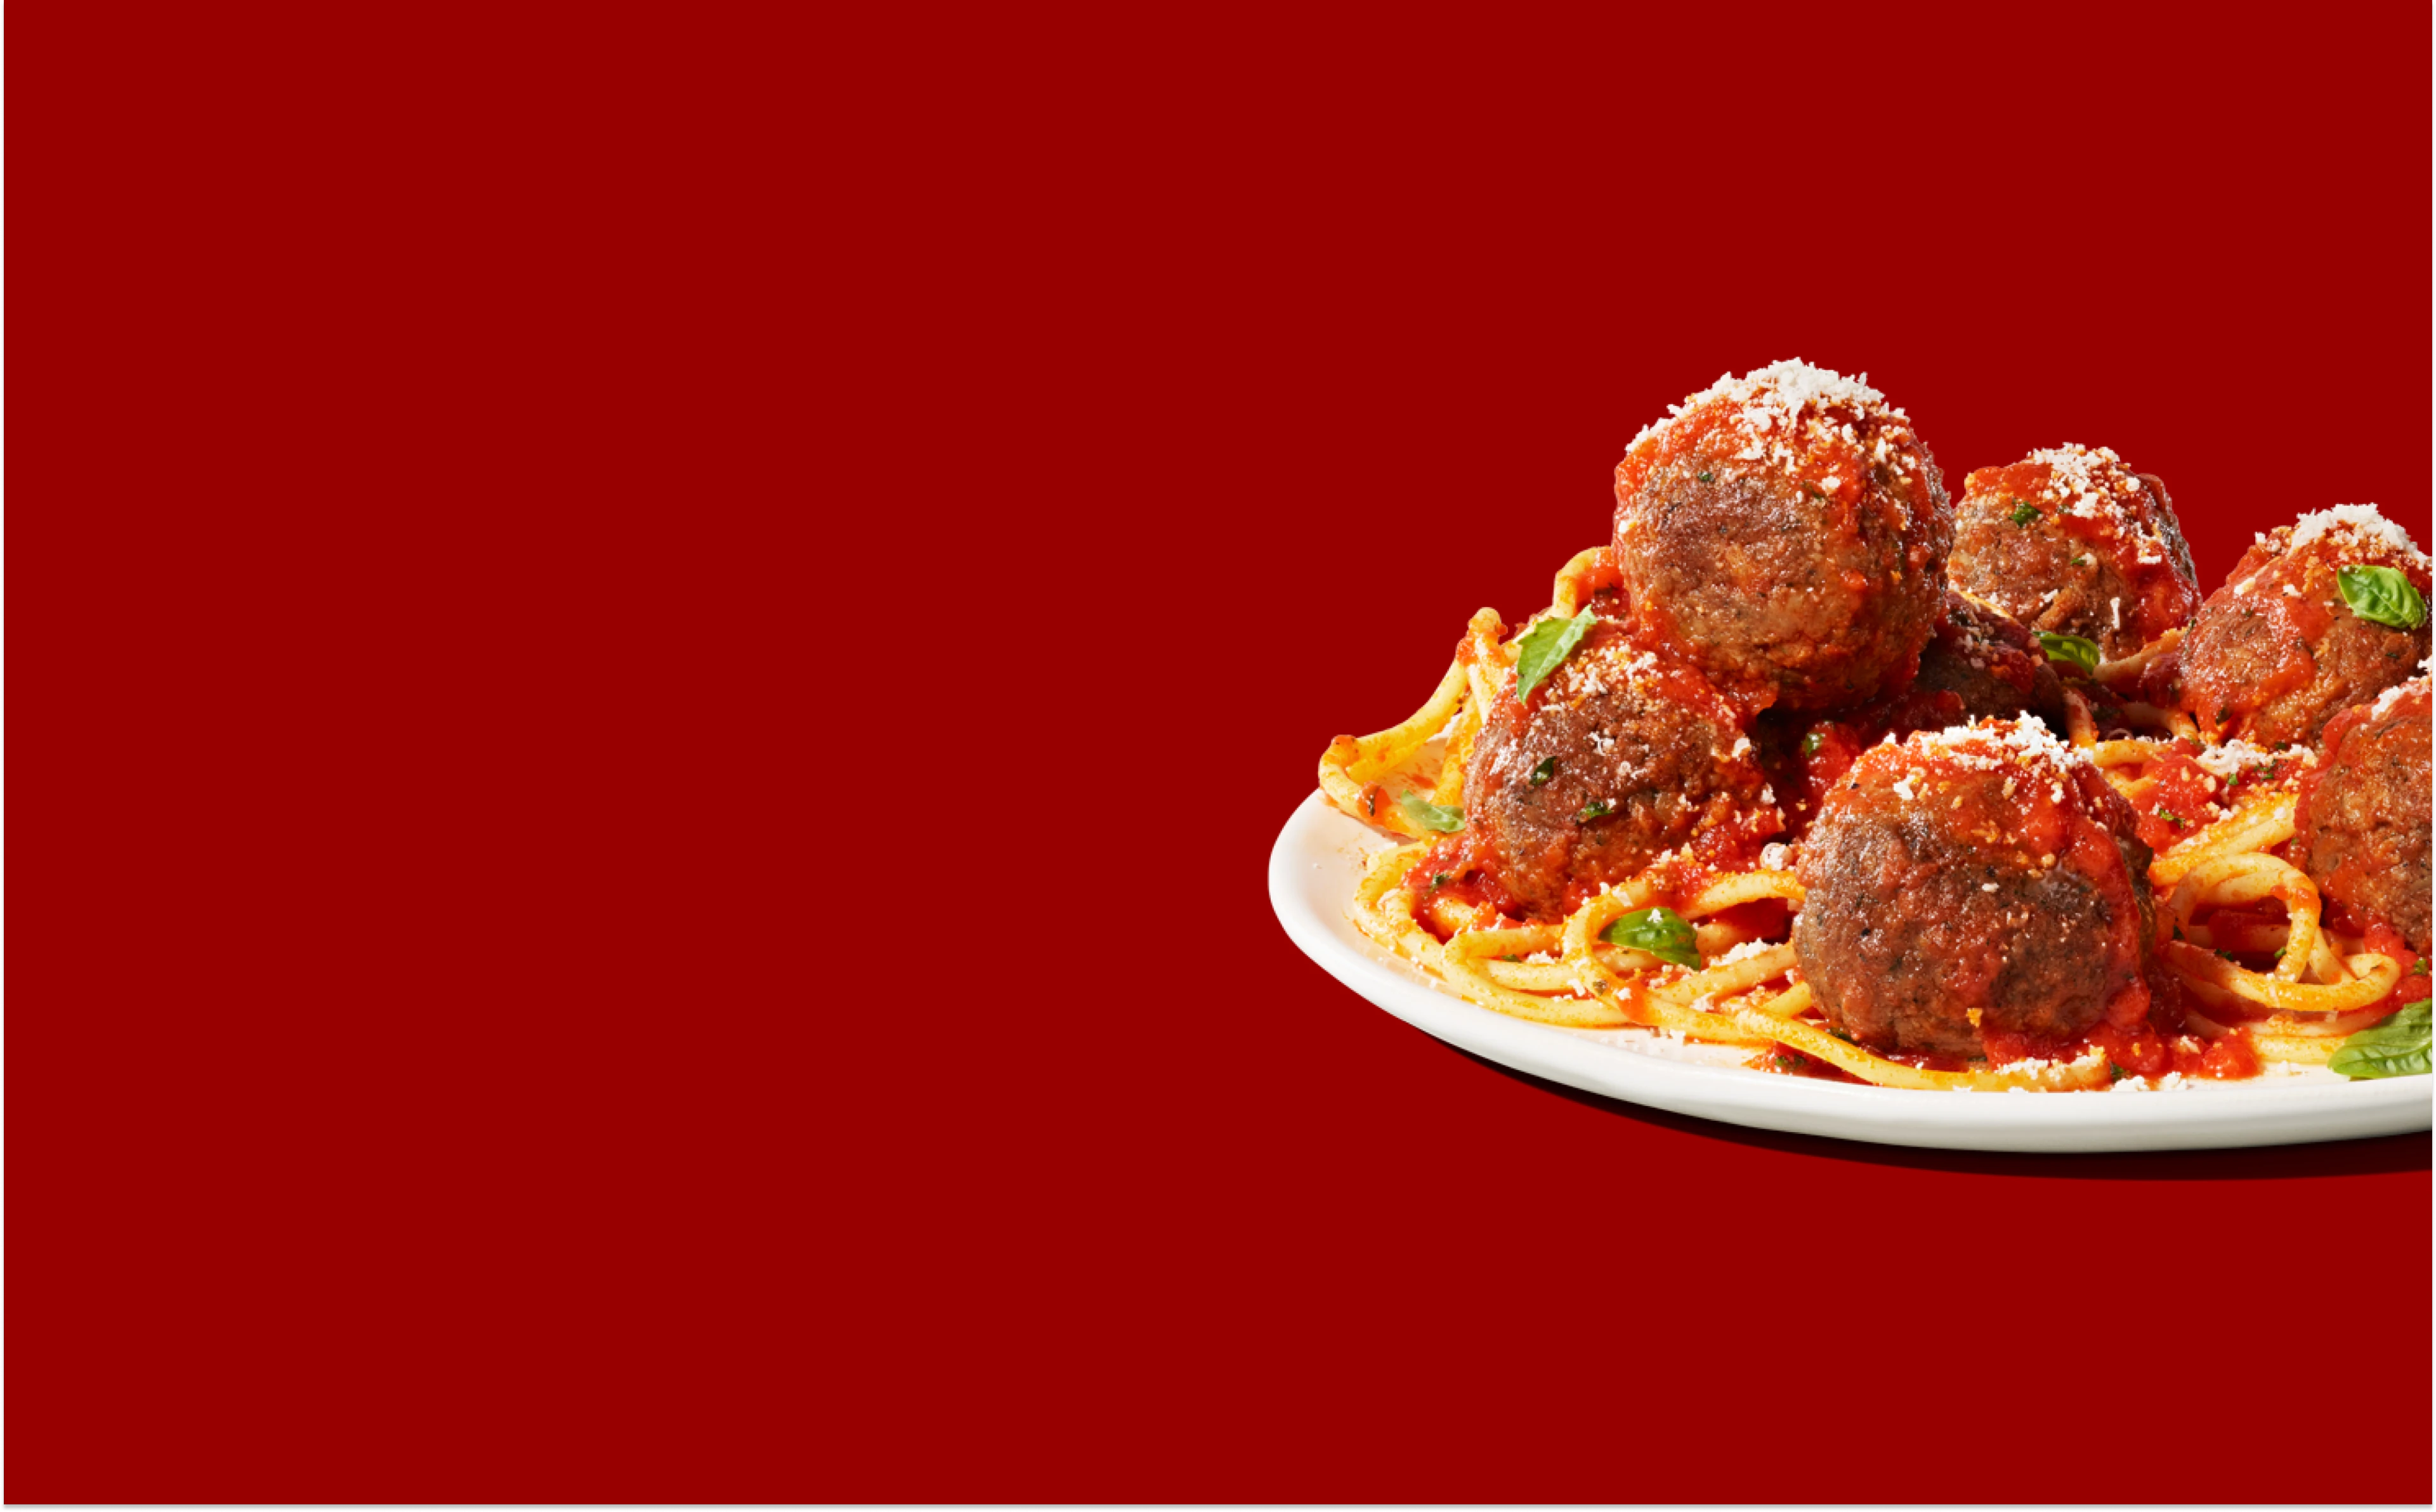 Impossible Meatballs plated with spaghetti